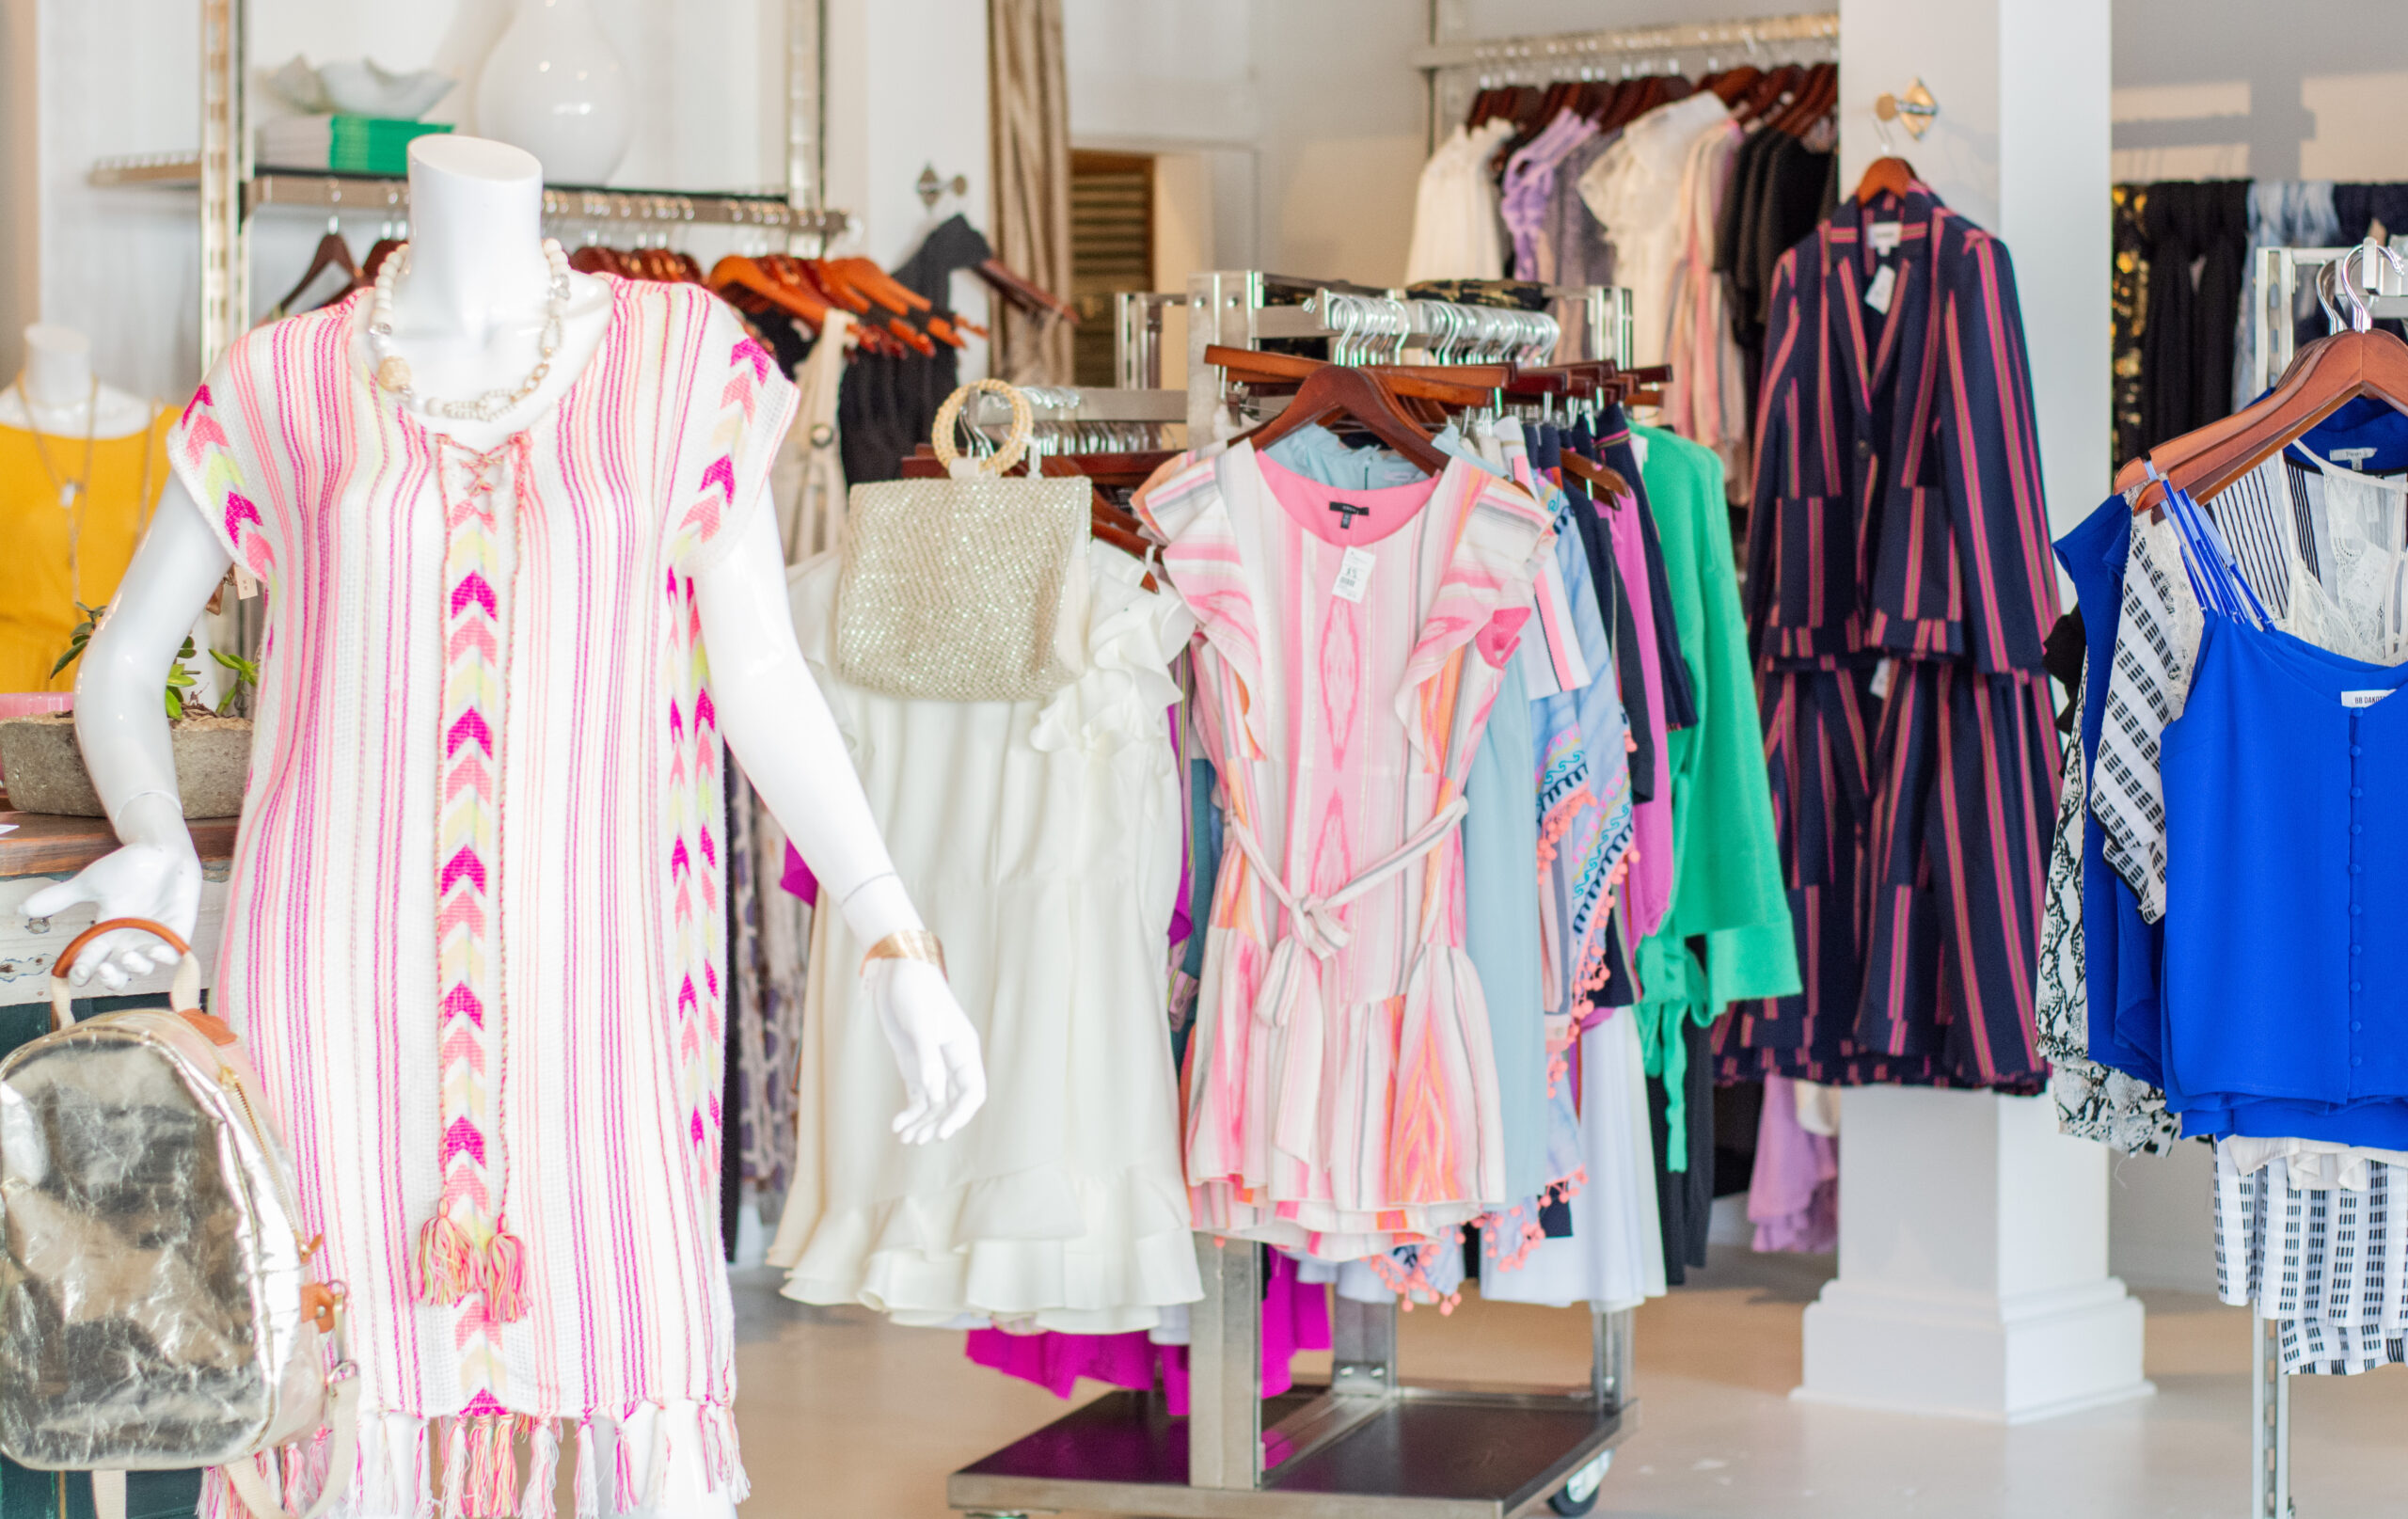 Upscale consignment boutique, Karen's Closet, gives new life to women's  clothing, accessories